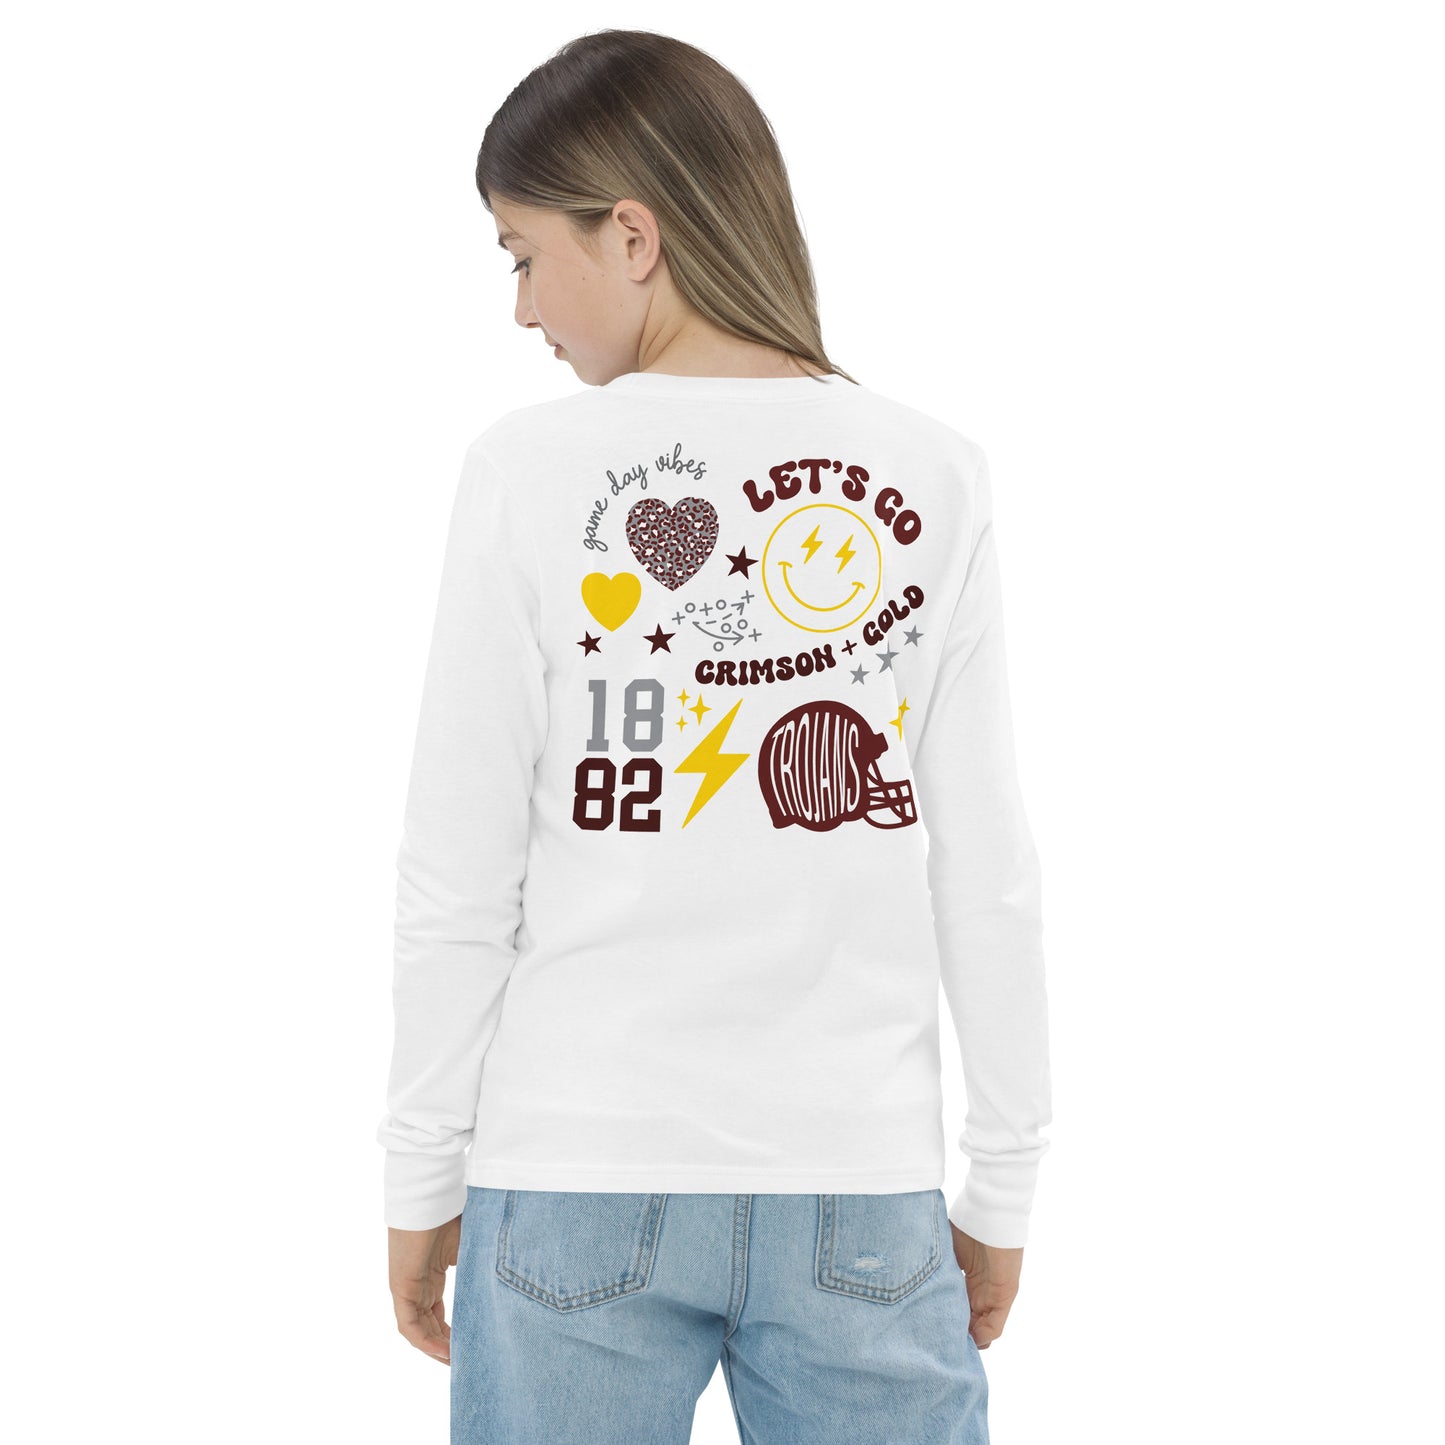 Trojans Game Day Youth Long Sleeve Tee